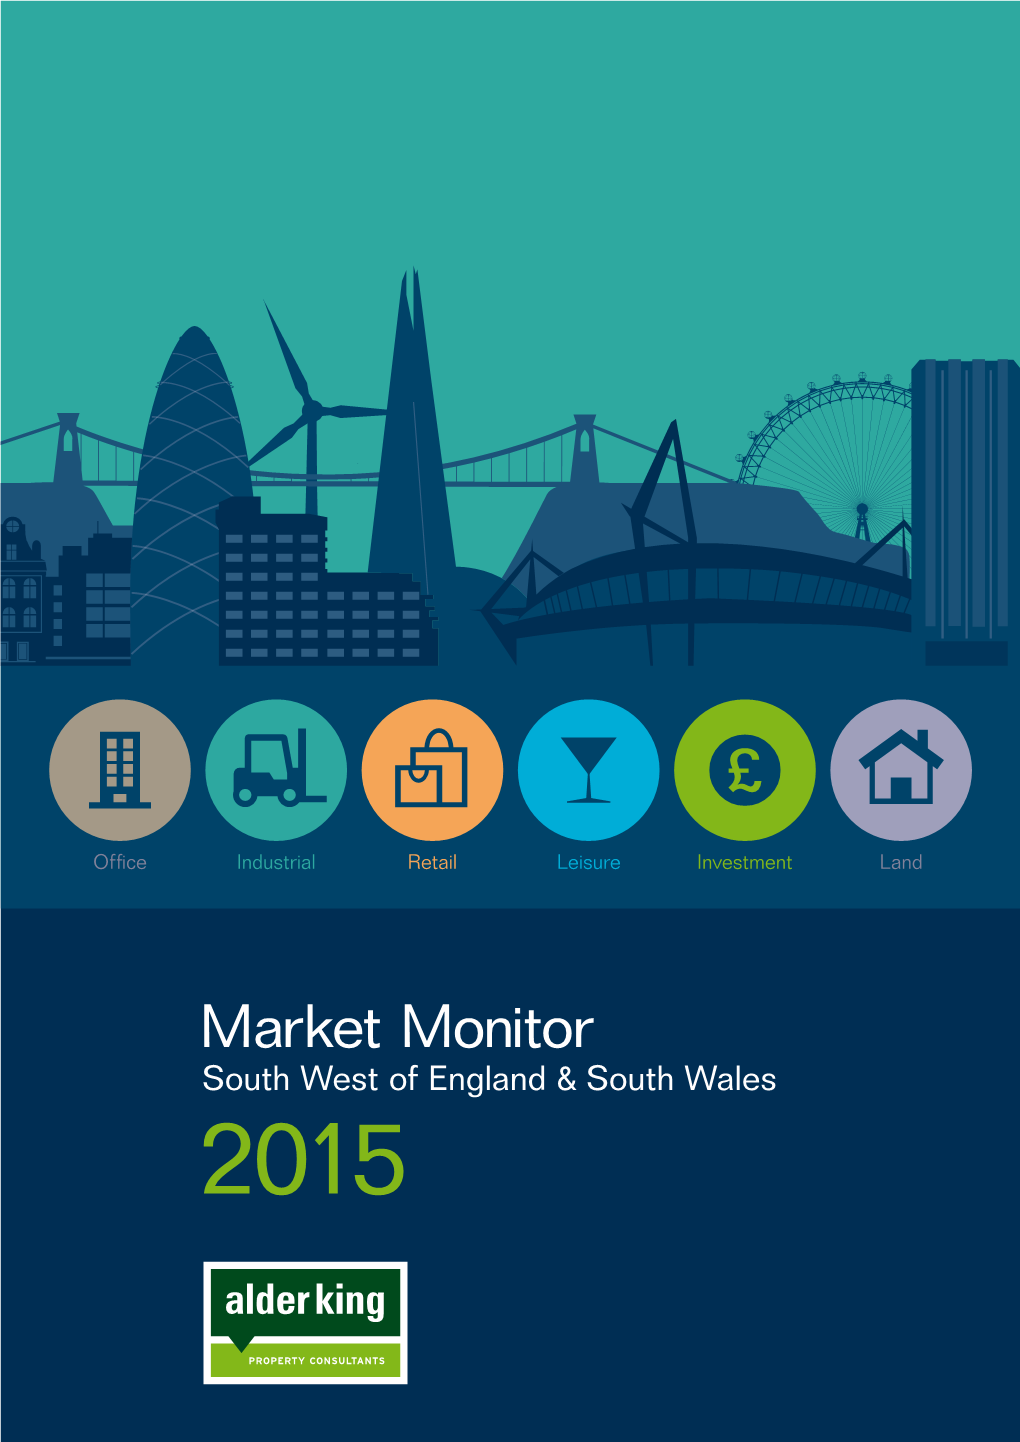 Market Monitor South West of England & South Wales 2015 2 Glass Wharf, Bristol